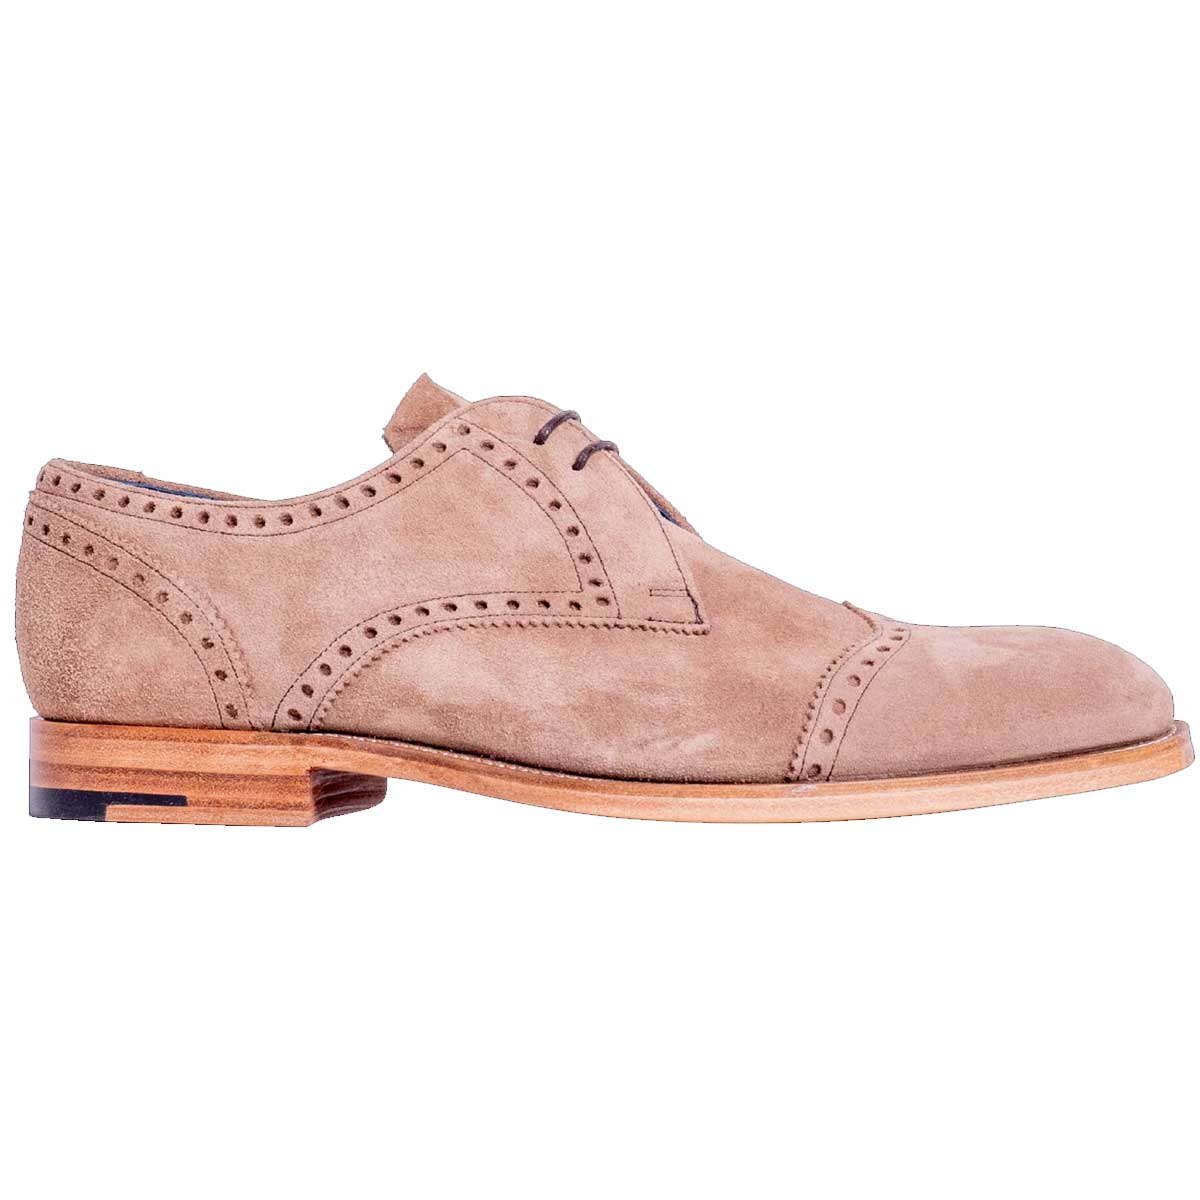 40% OFF BARKER Matlock Shoes - Mens - Palude Suede - Size: UK 9